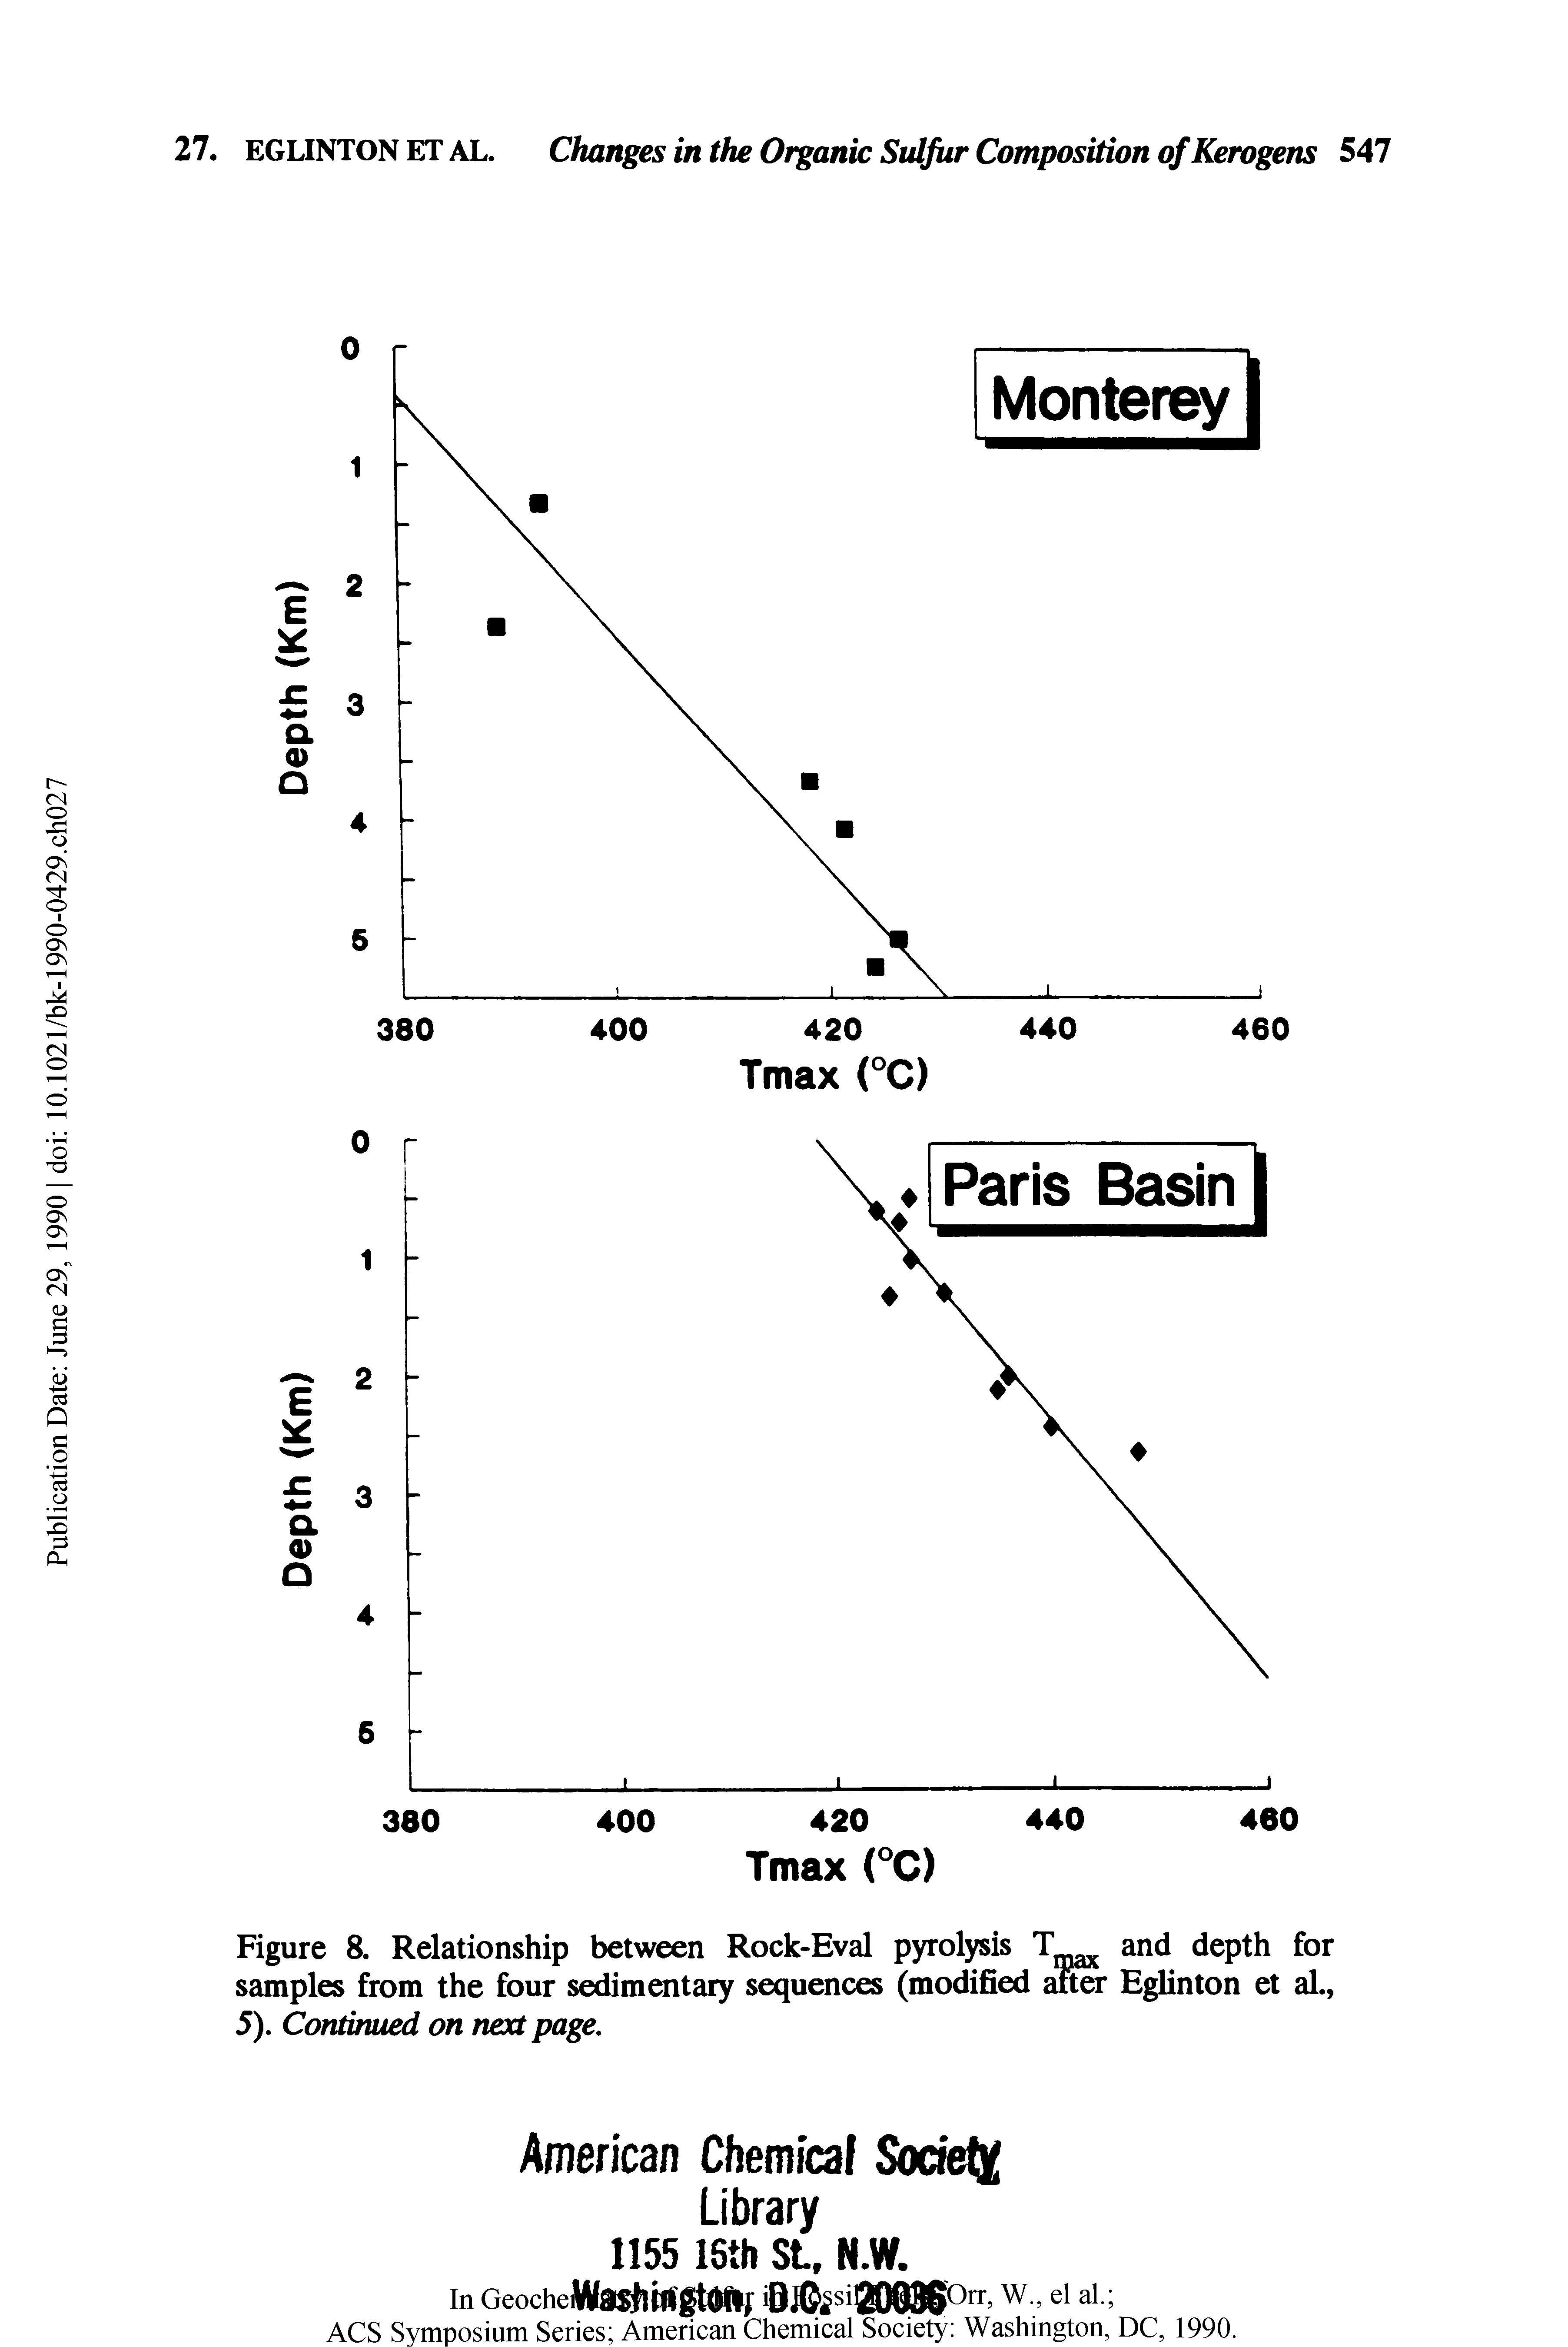 Figure 8. Relationship between Rock-Eval pyrolysis T and depth for samples from the four sedimentary sequences (modified after Eglinton et al., 5). Continued on next page.